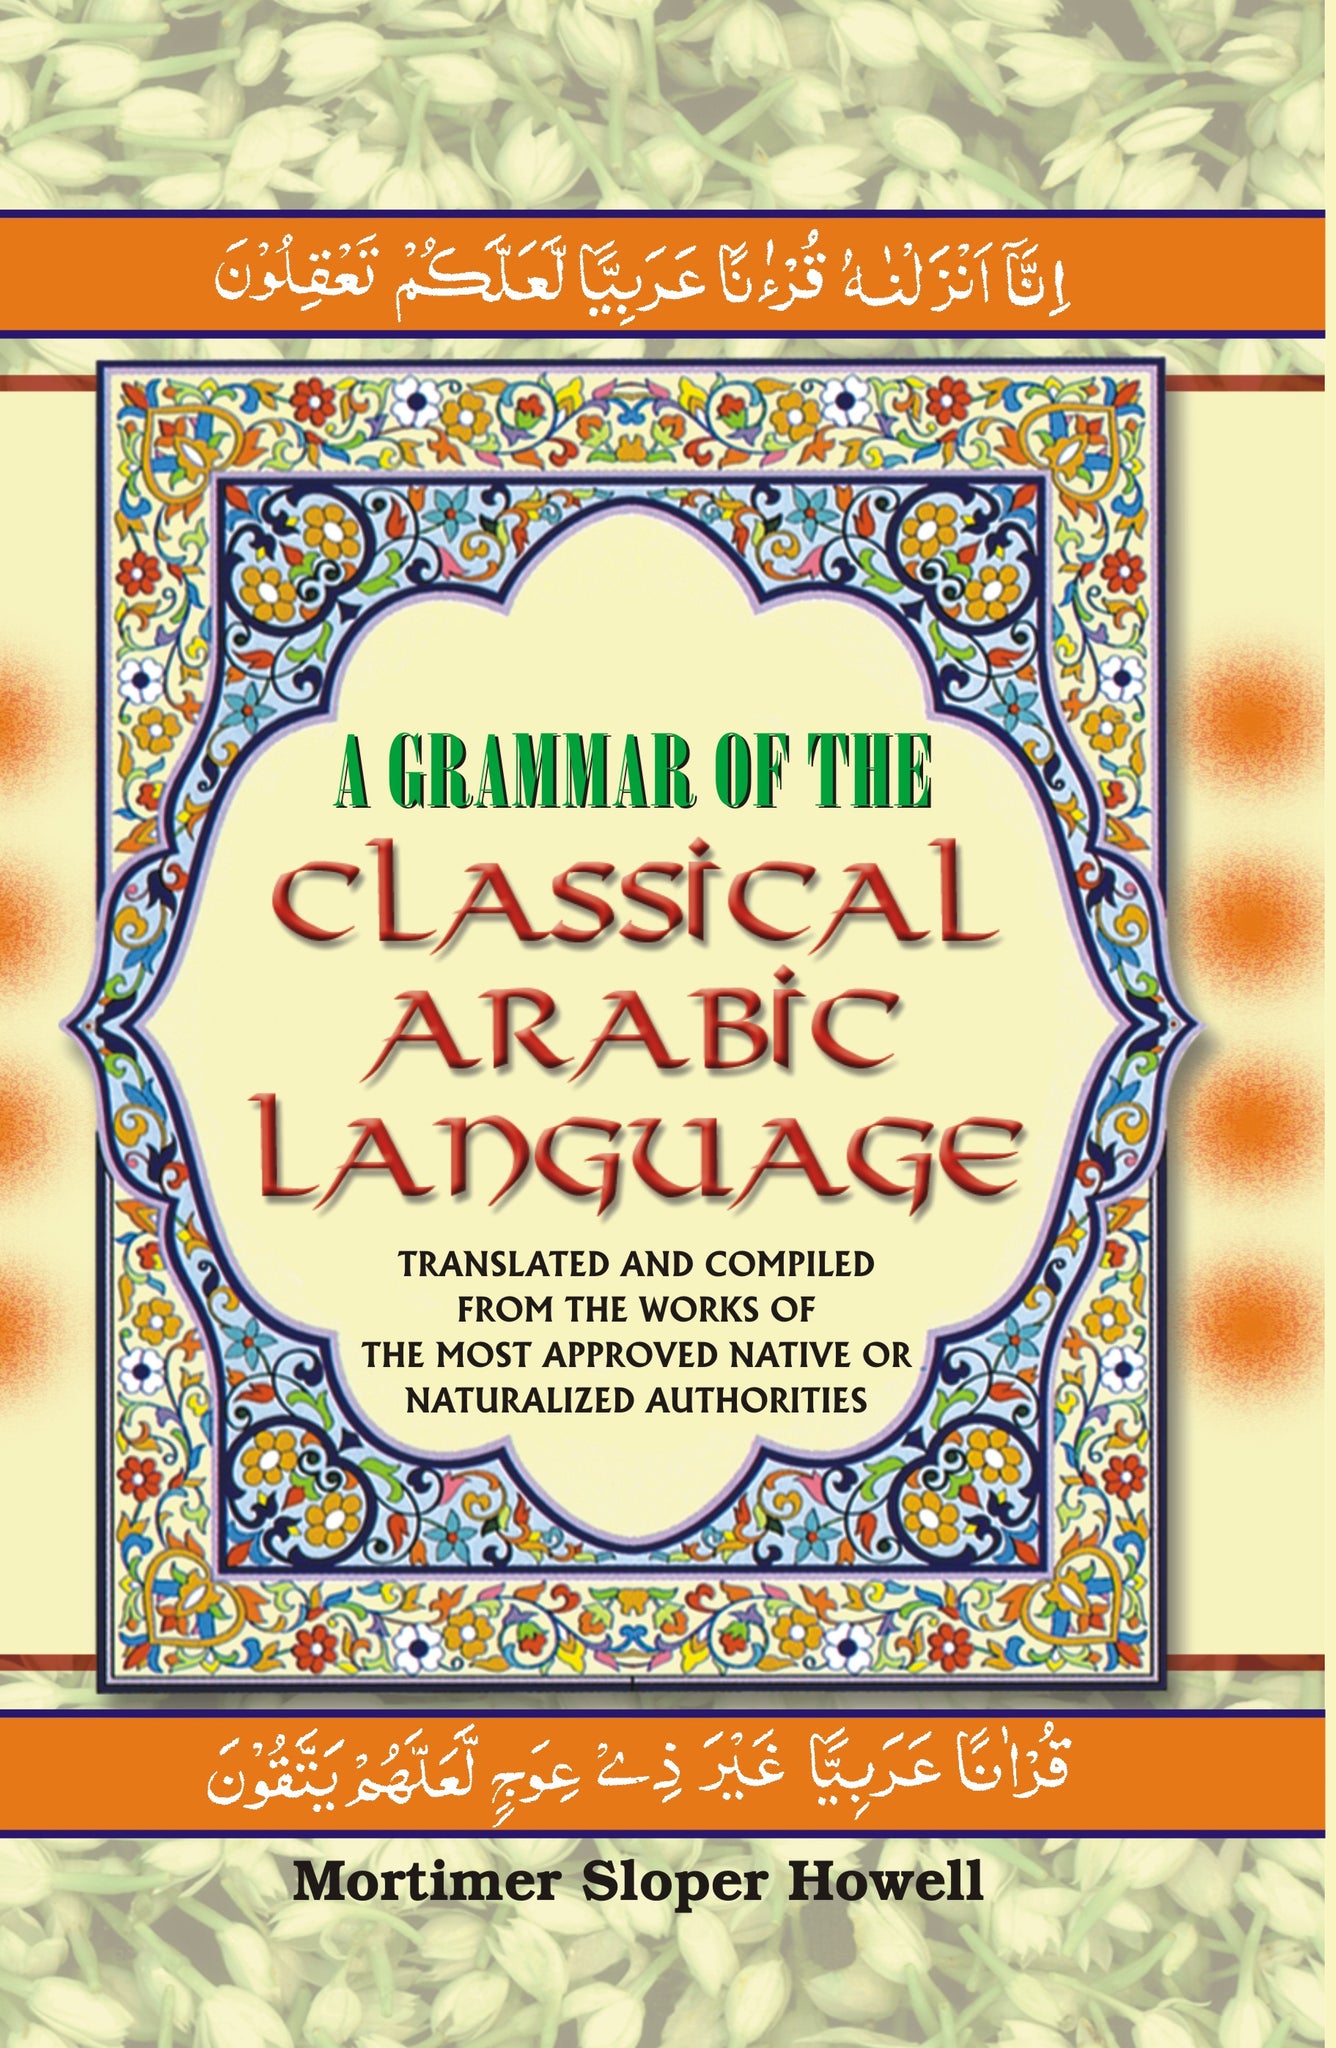 A Grammar of the Classical Arabic Language : Translated and Compiled From the Works of the Most Approved Native Or Naturalized Authorities ( The Common Process - Part 2) Volume Vol. 7th [Hardcover]